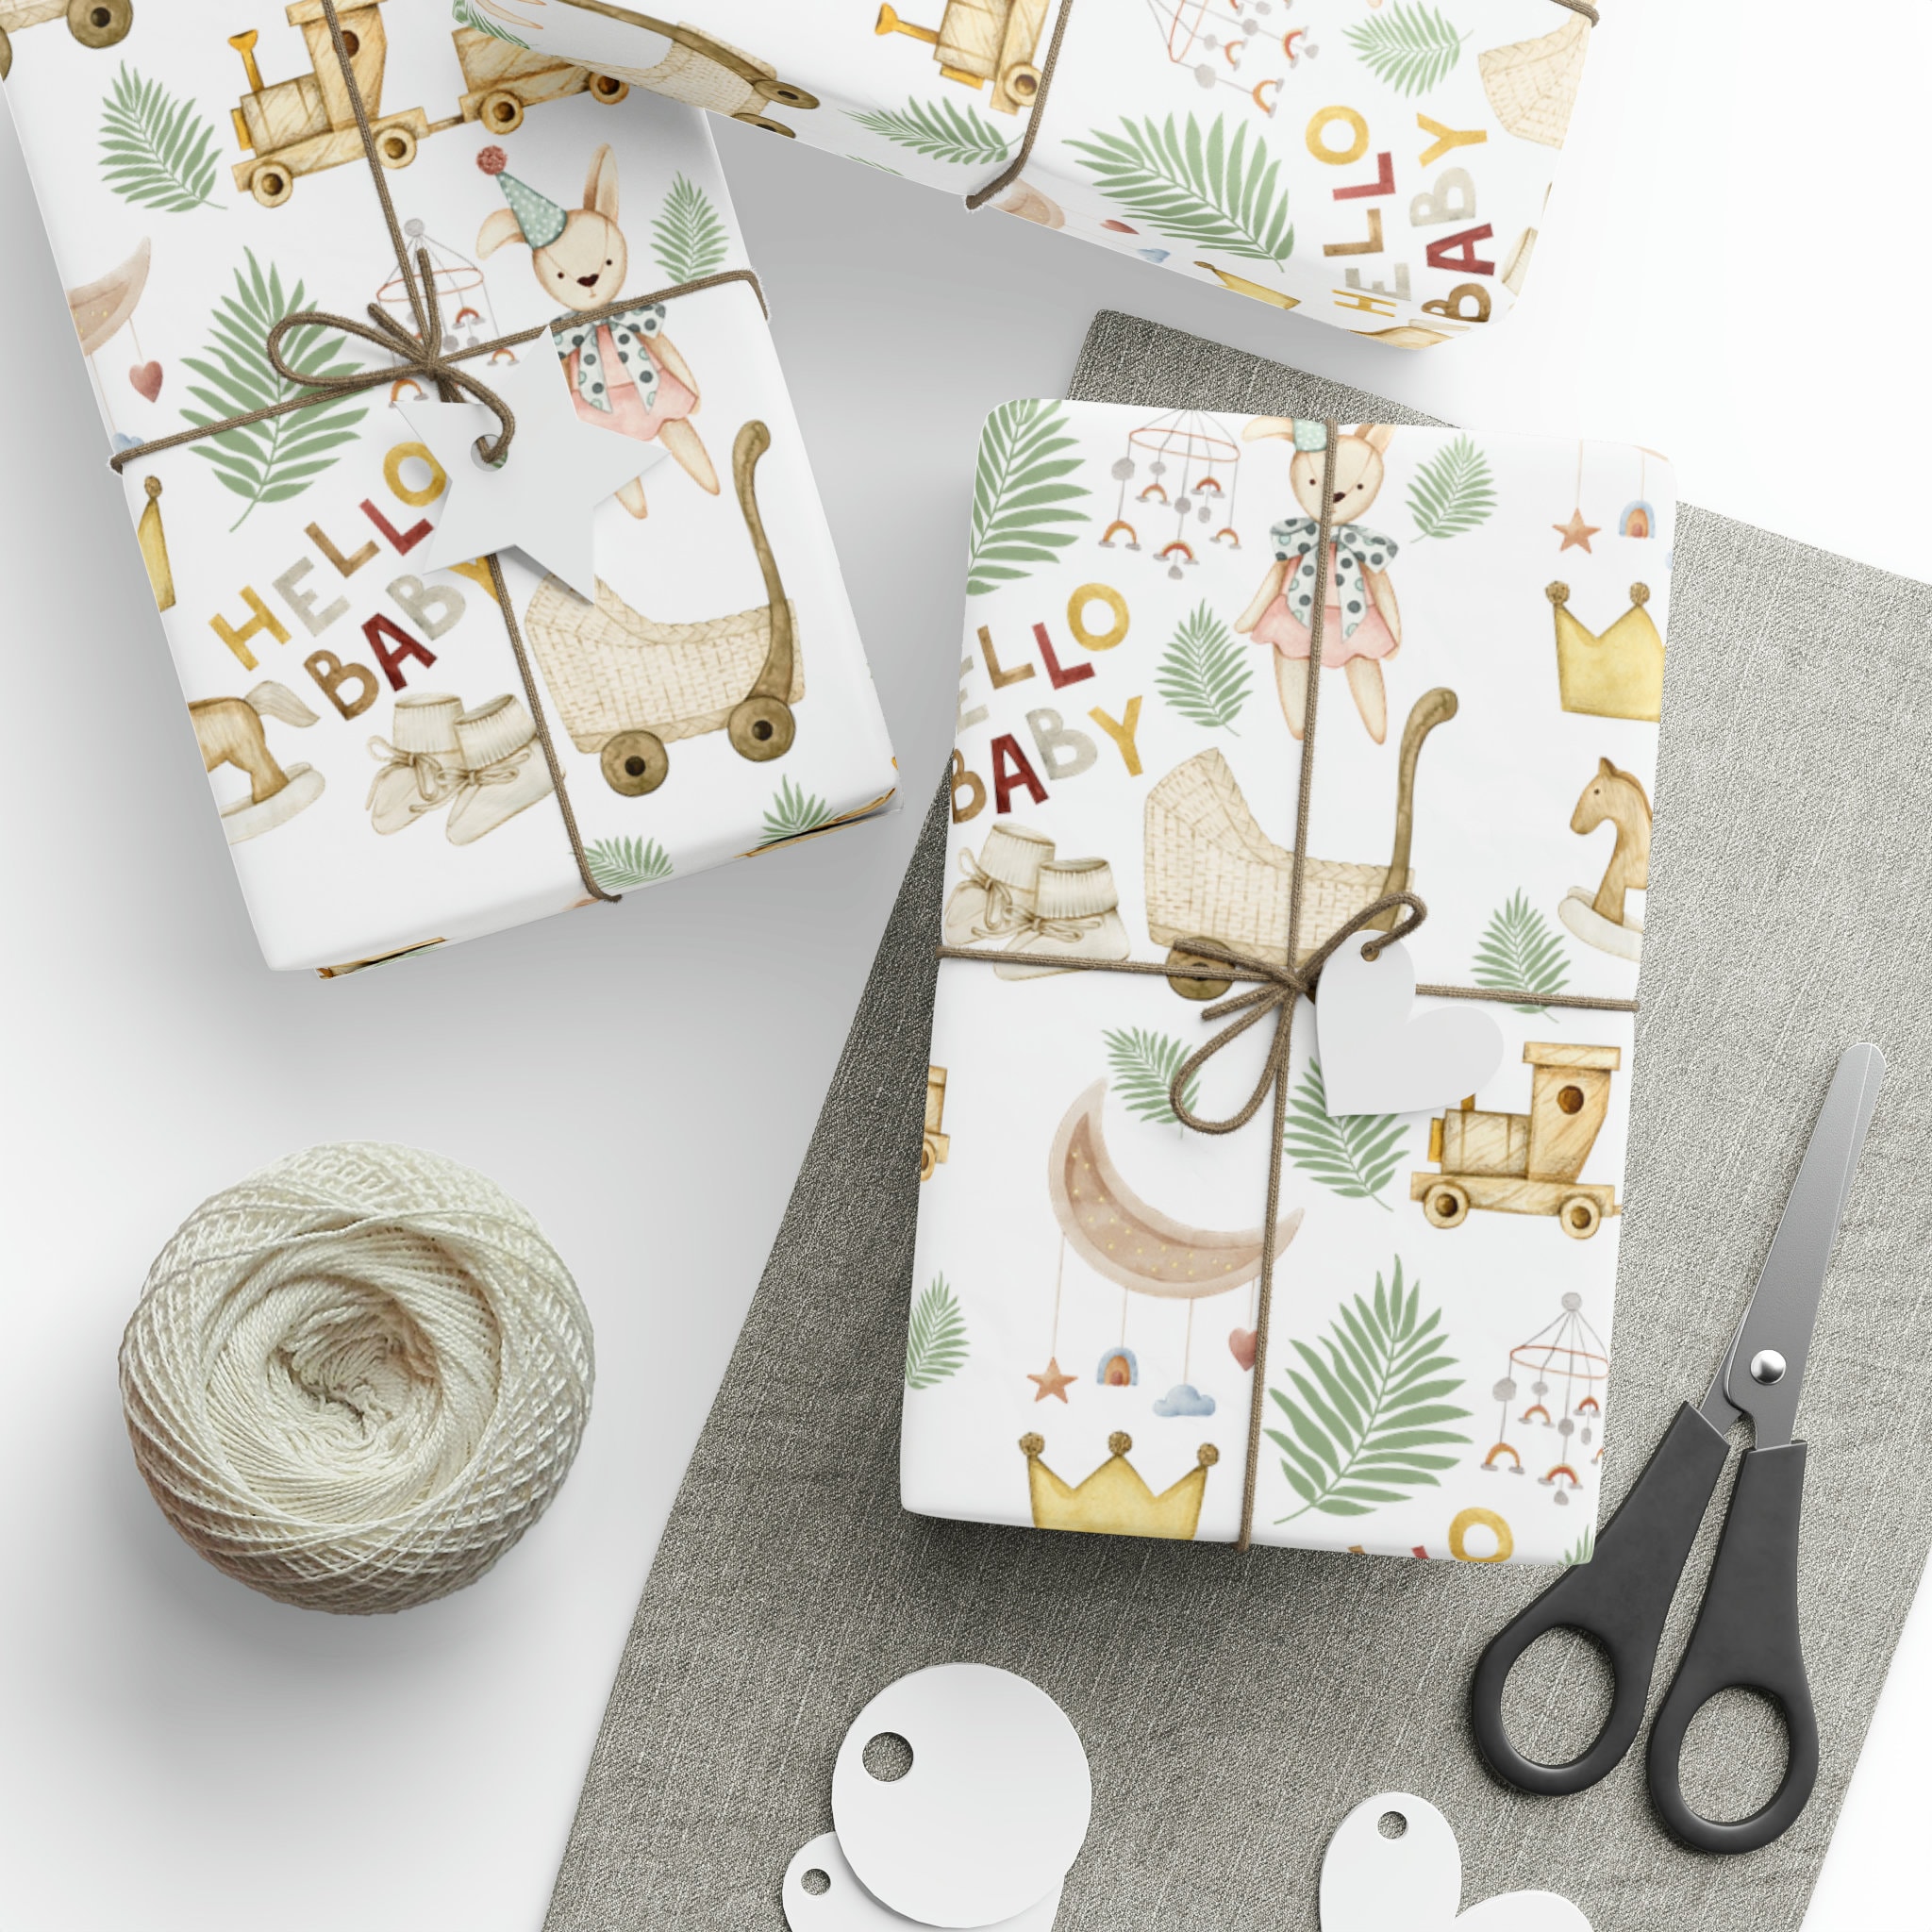  Dtiafu Christmas Wrapping Paper Bundle for Kids Boys Girls  Women - 12 Sheets North Pole Gift Wrap with Cute Bear Bunny Reindeer  Woodland Animal Design Great for Holiday Vacation - 20